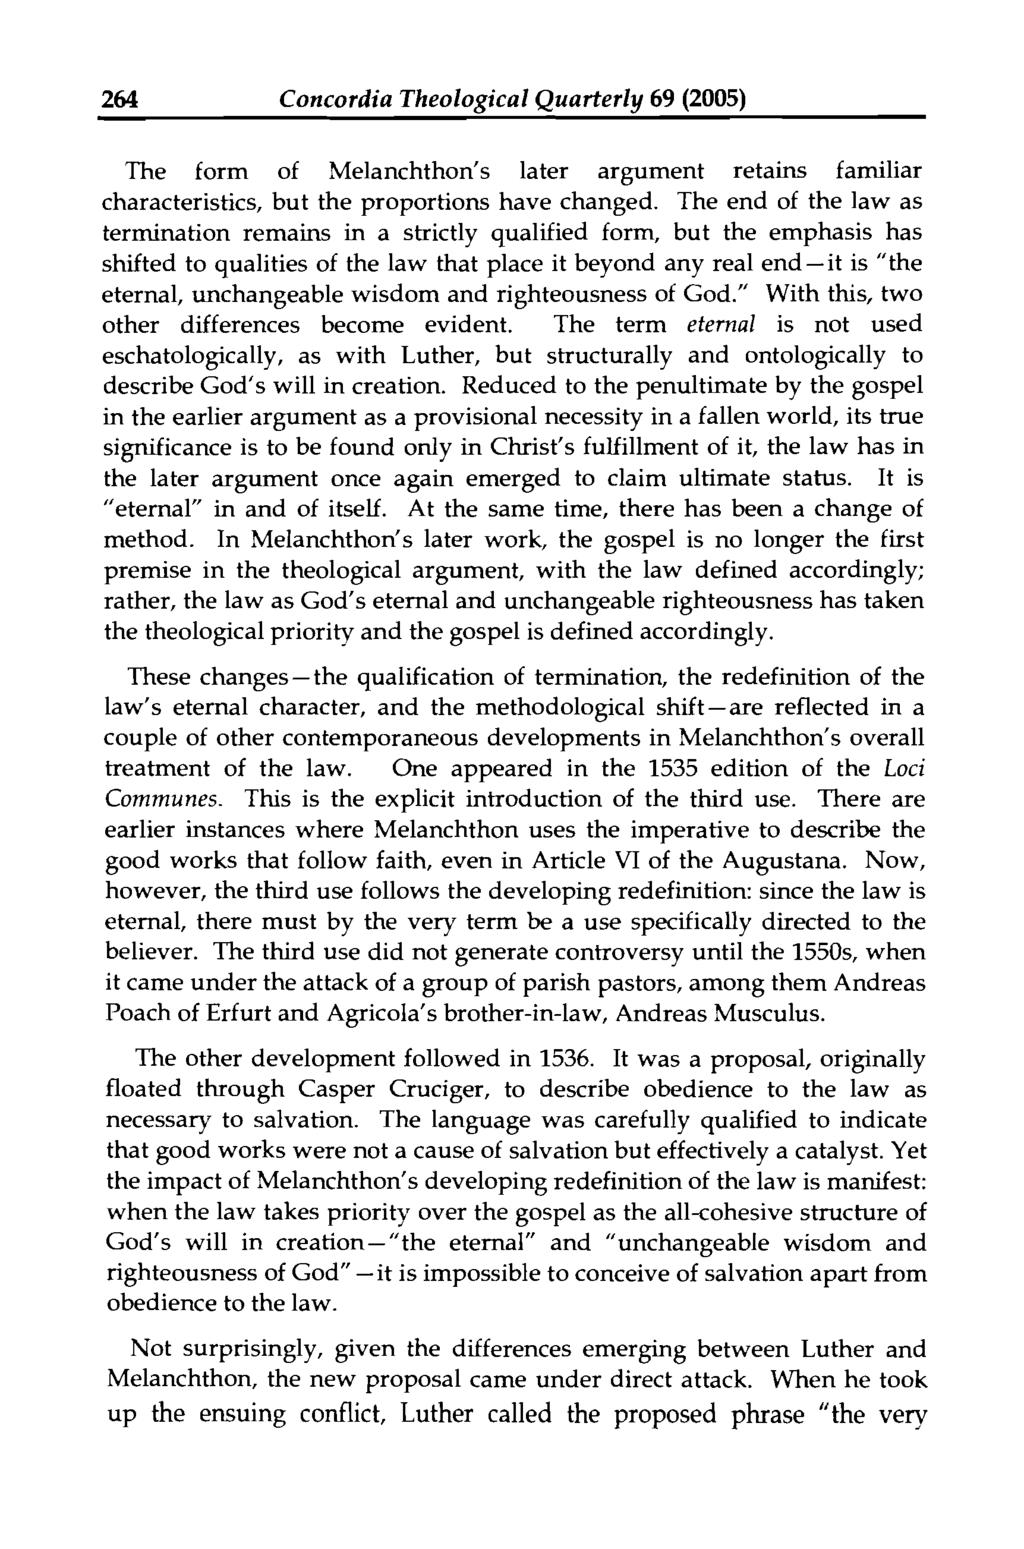 264 Concordia Theological Quarterly 69 (2005) The form of Melanchthon's later argument retains familiar characteristics, but the proportions have changed.